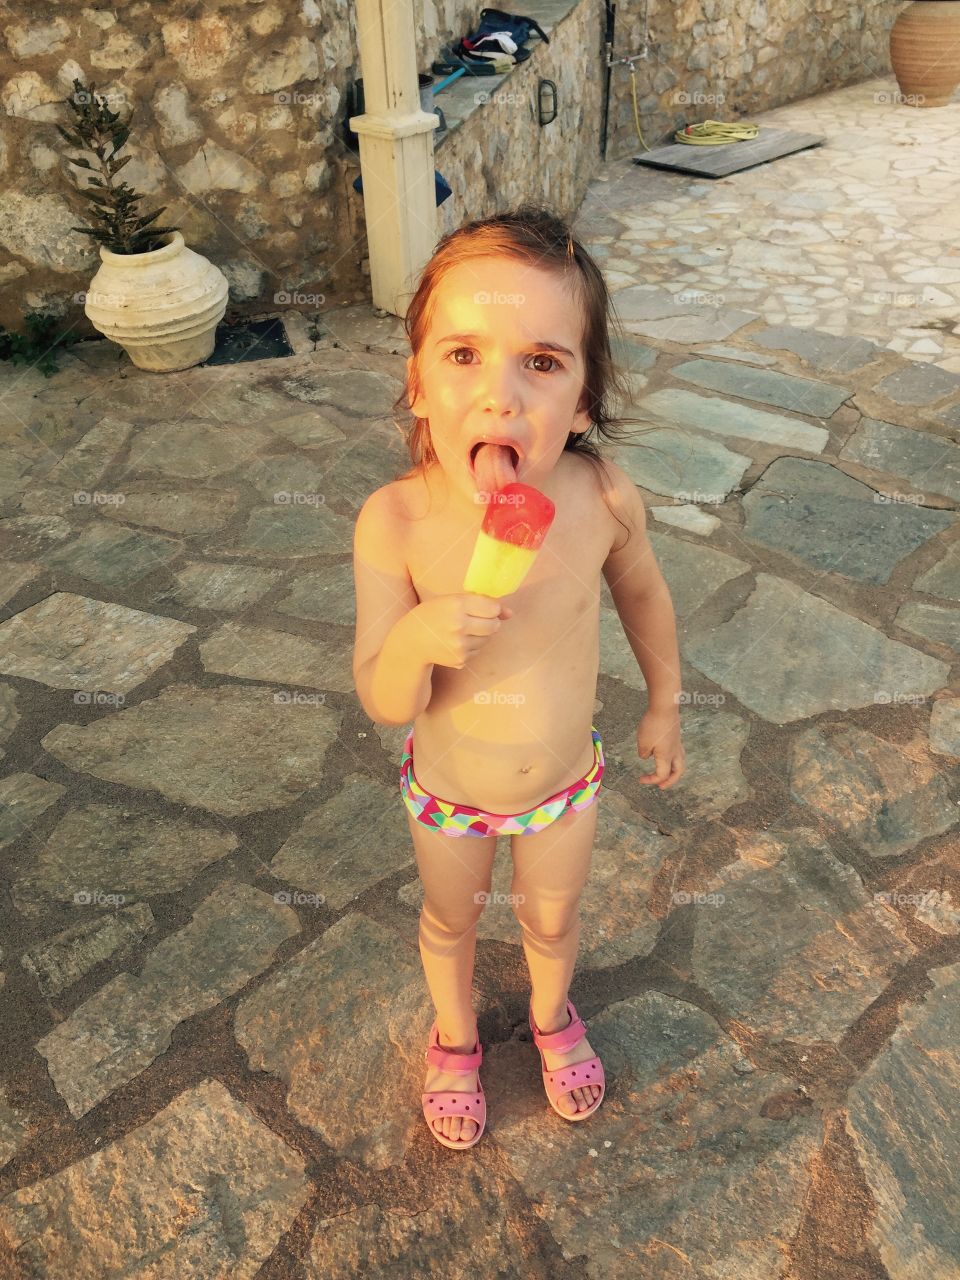 Topless girl eating ice cream candy